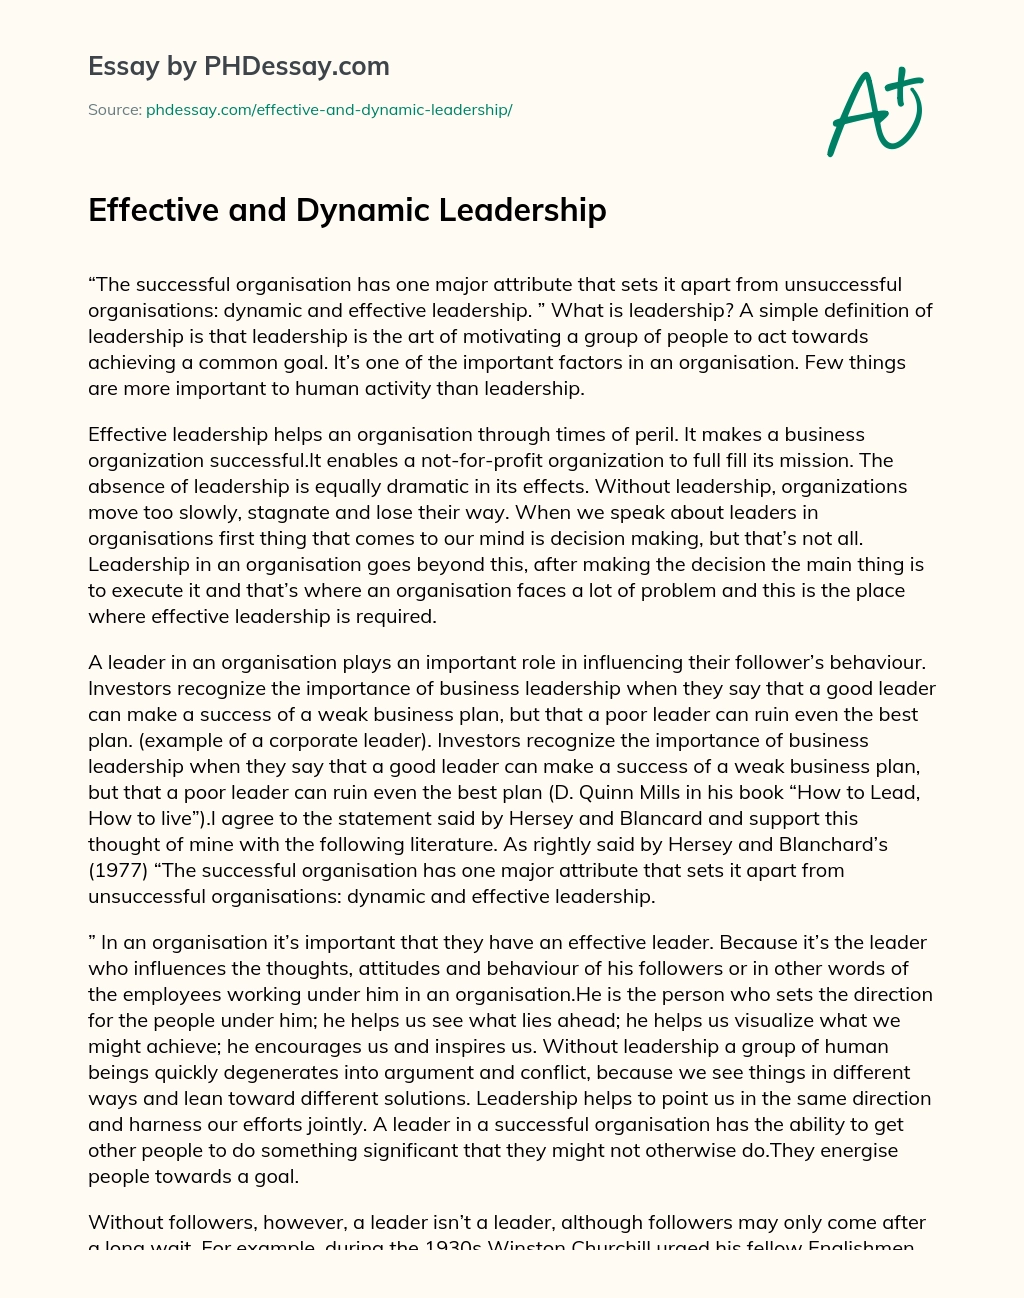 Effective and Dynamic Leadership essay